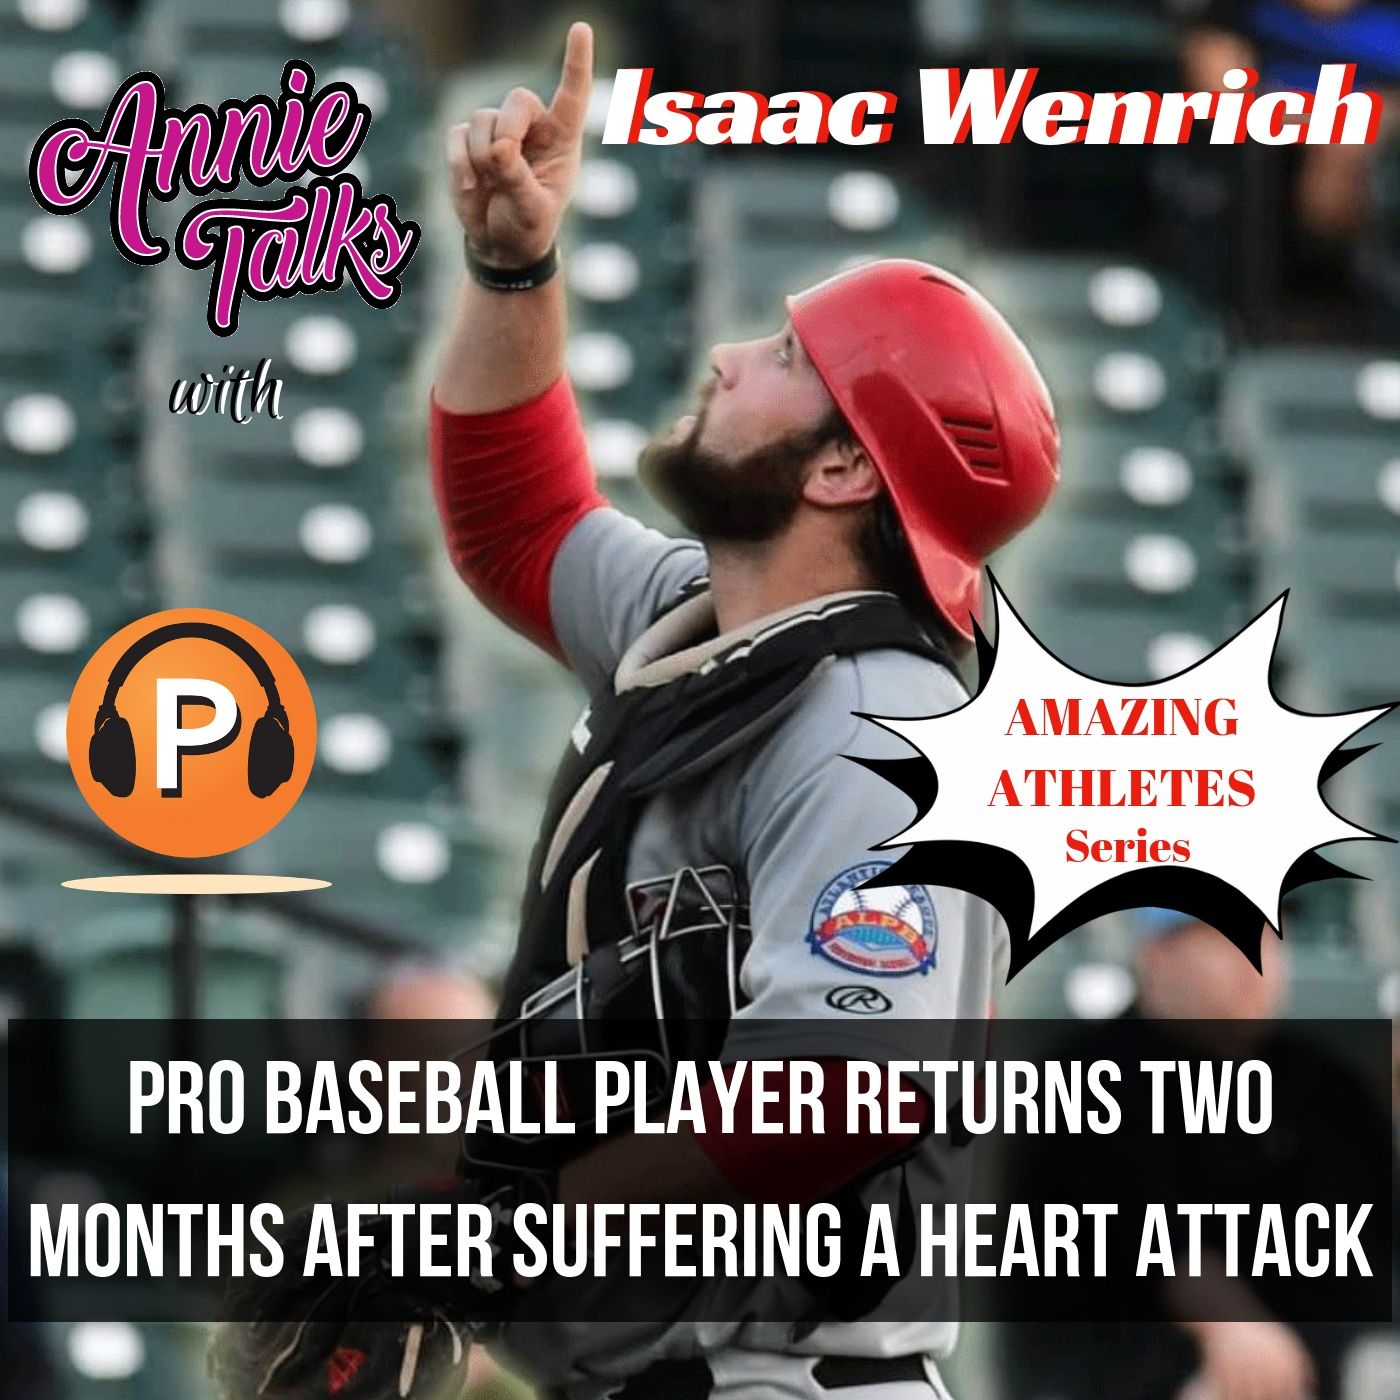 Episode 43 - Annie Talks with Isaac Wenrich | Pro Baseball Player Returns After Heart Attack, Named 